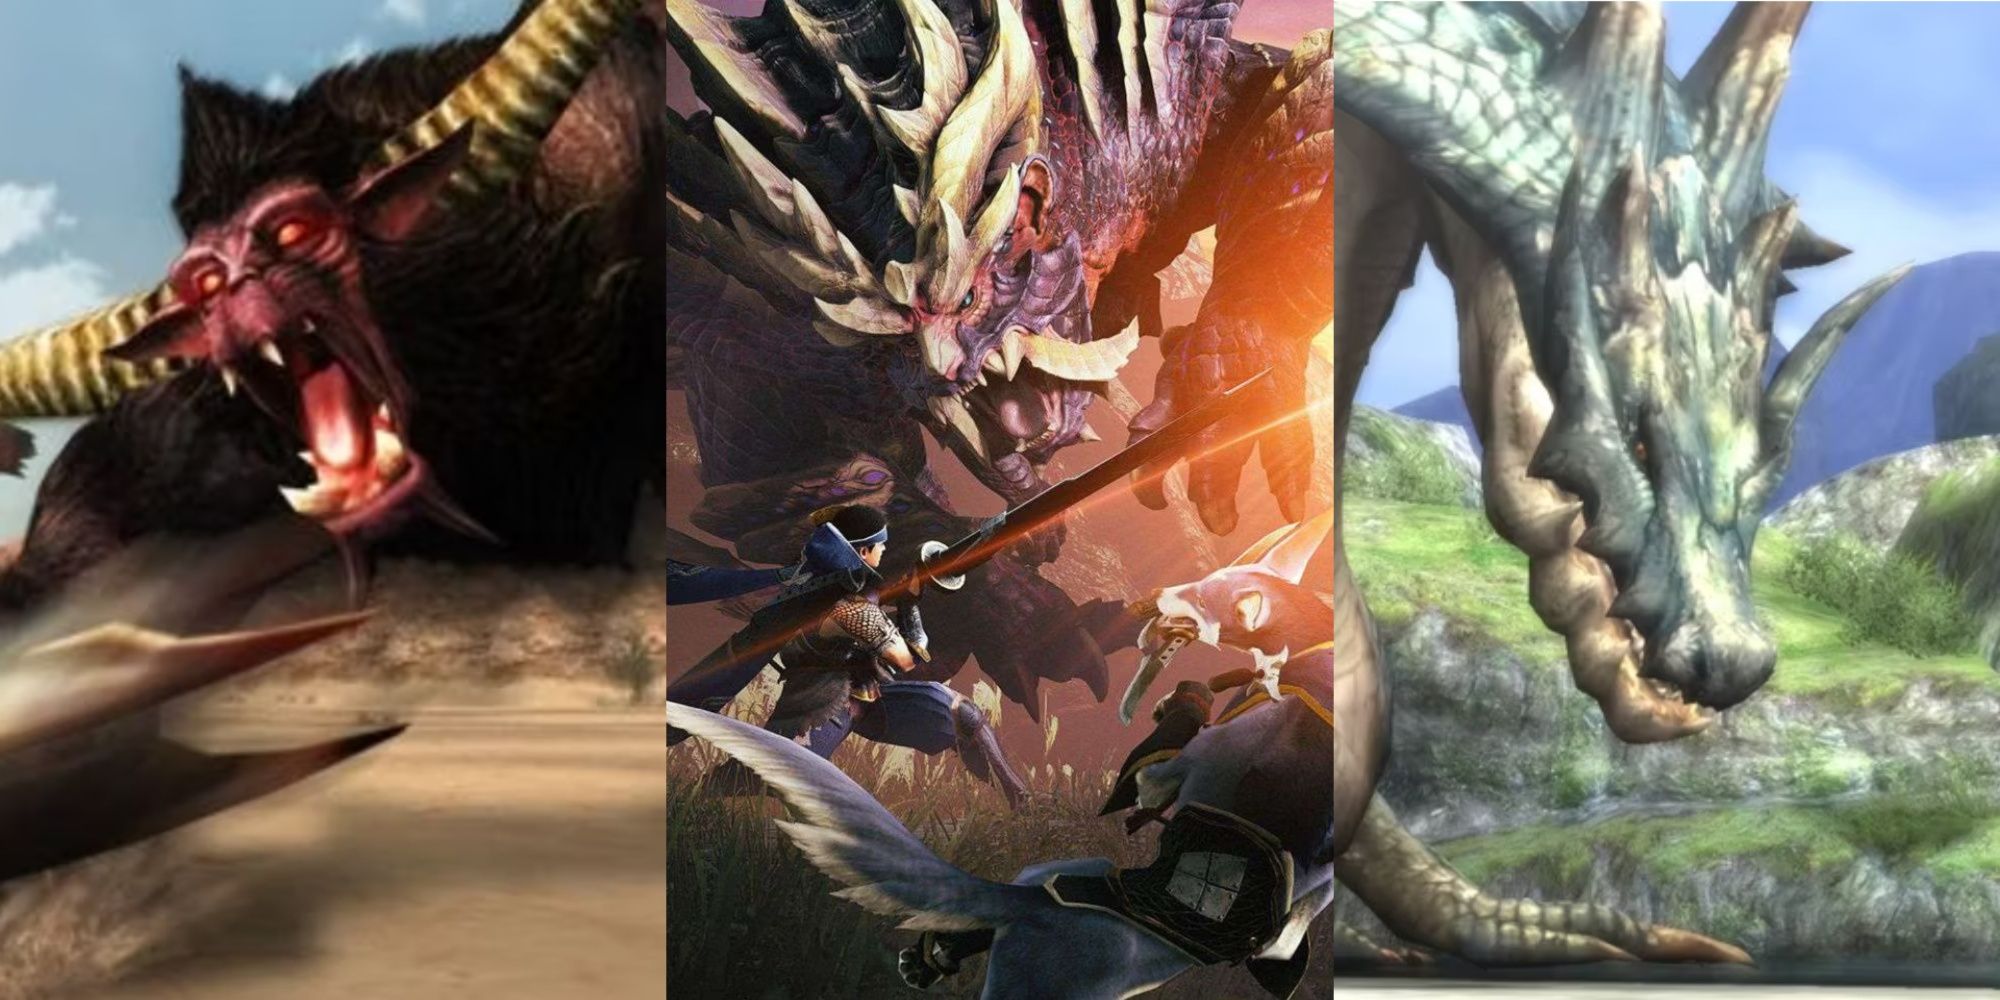 Monster Hunter Rajang attacking, Monster Hunter rise cover art showing Magnamalo, and Lagiacrus in Monster Hunter Tri, left to right.